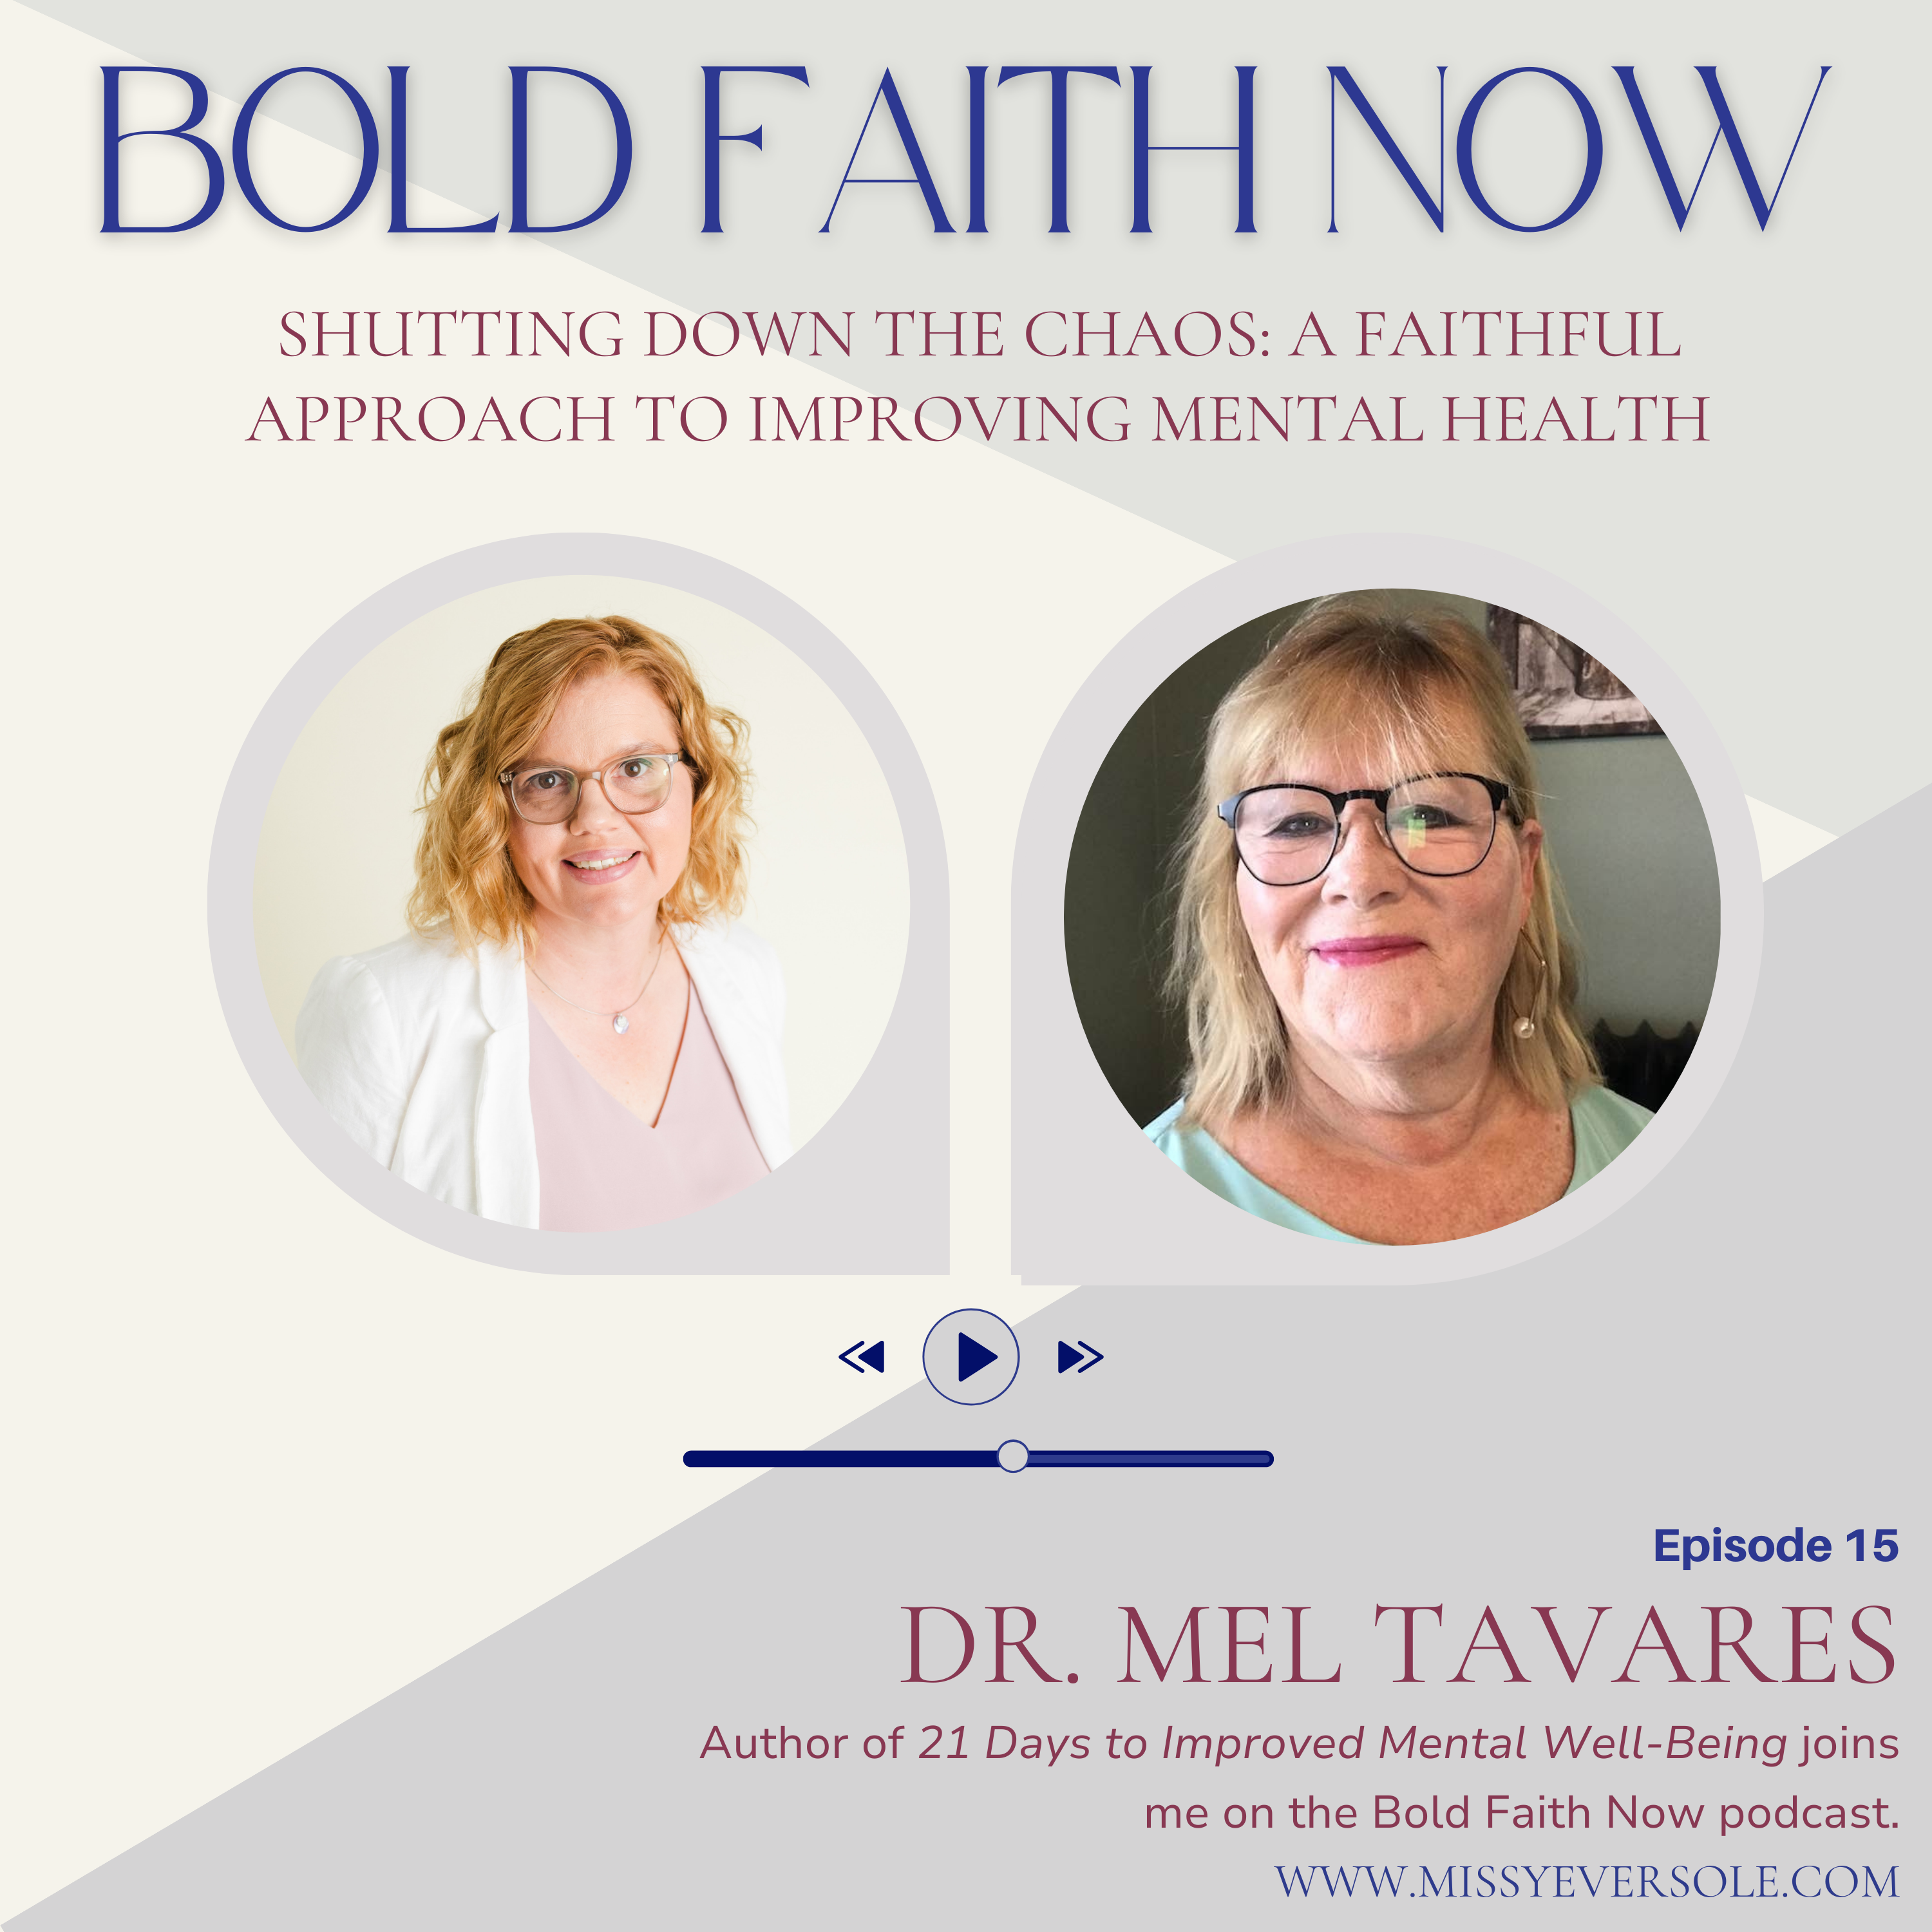 15 Shutting Down the Chaos: A Faithful Approach to Improving Mental Health with Dr. Mel Tavares